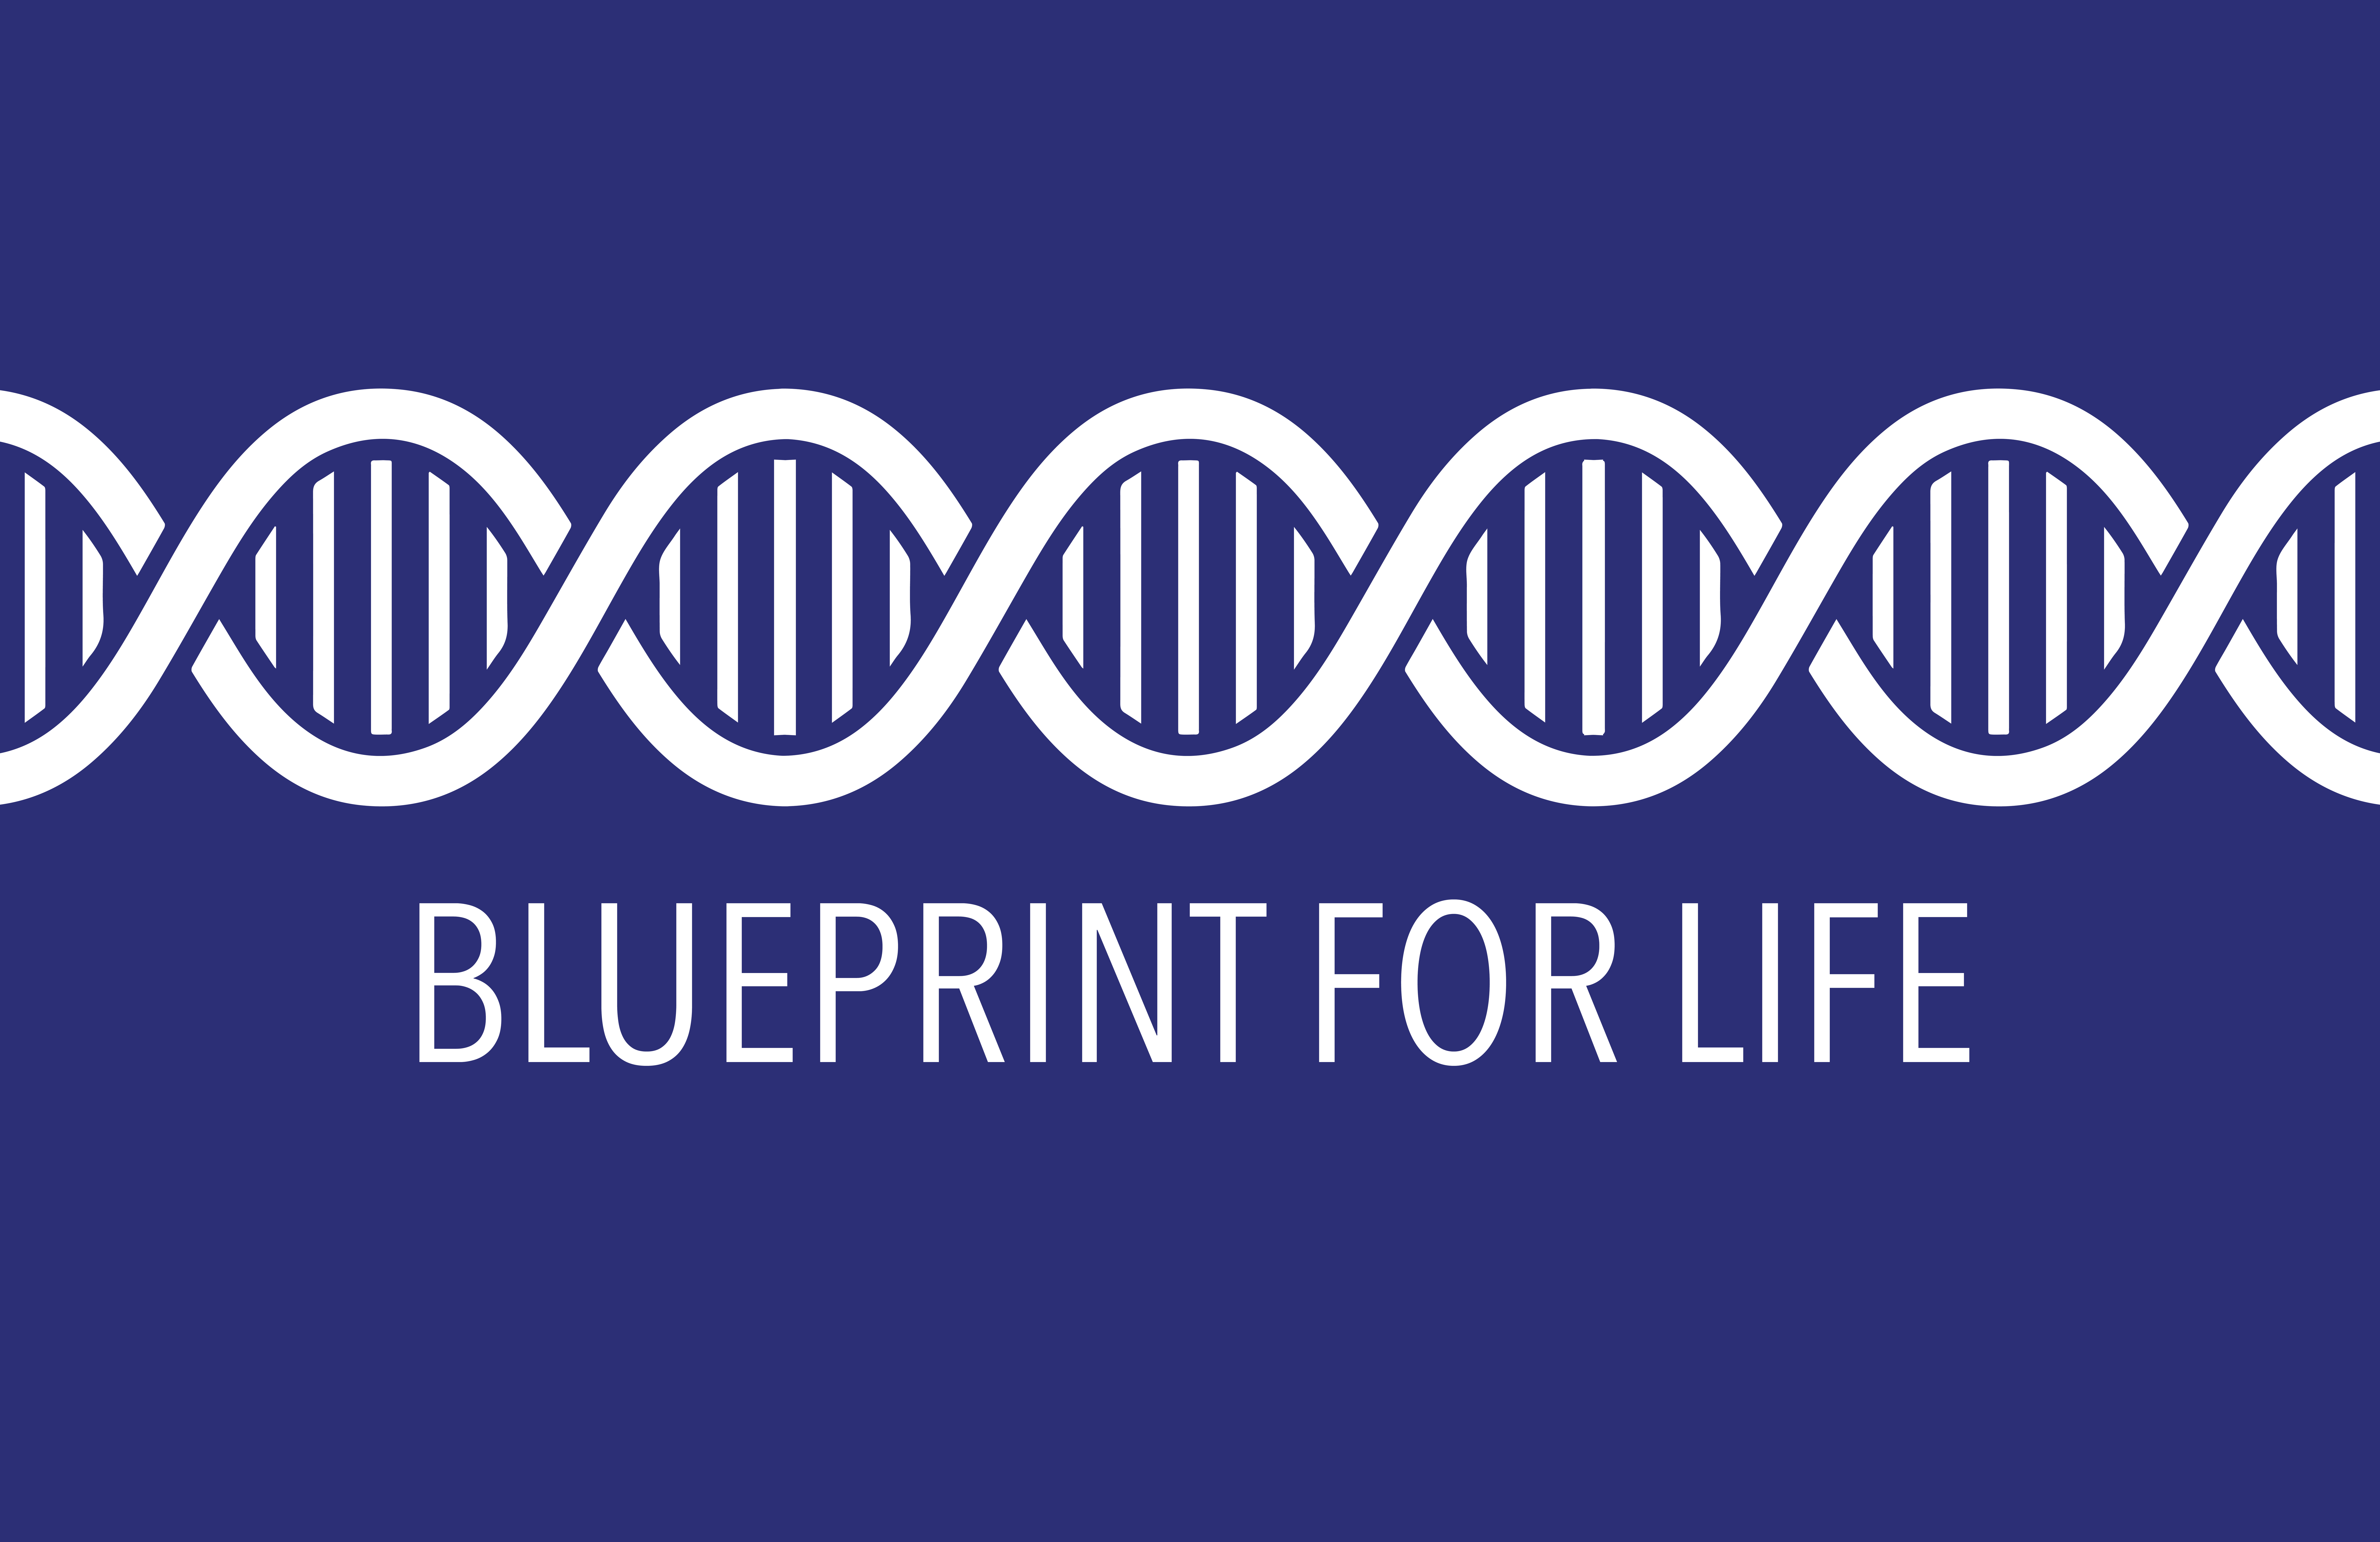 Blueprint for Life Coalition: ‘The Next Phase in the Pro-Life Movement’